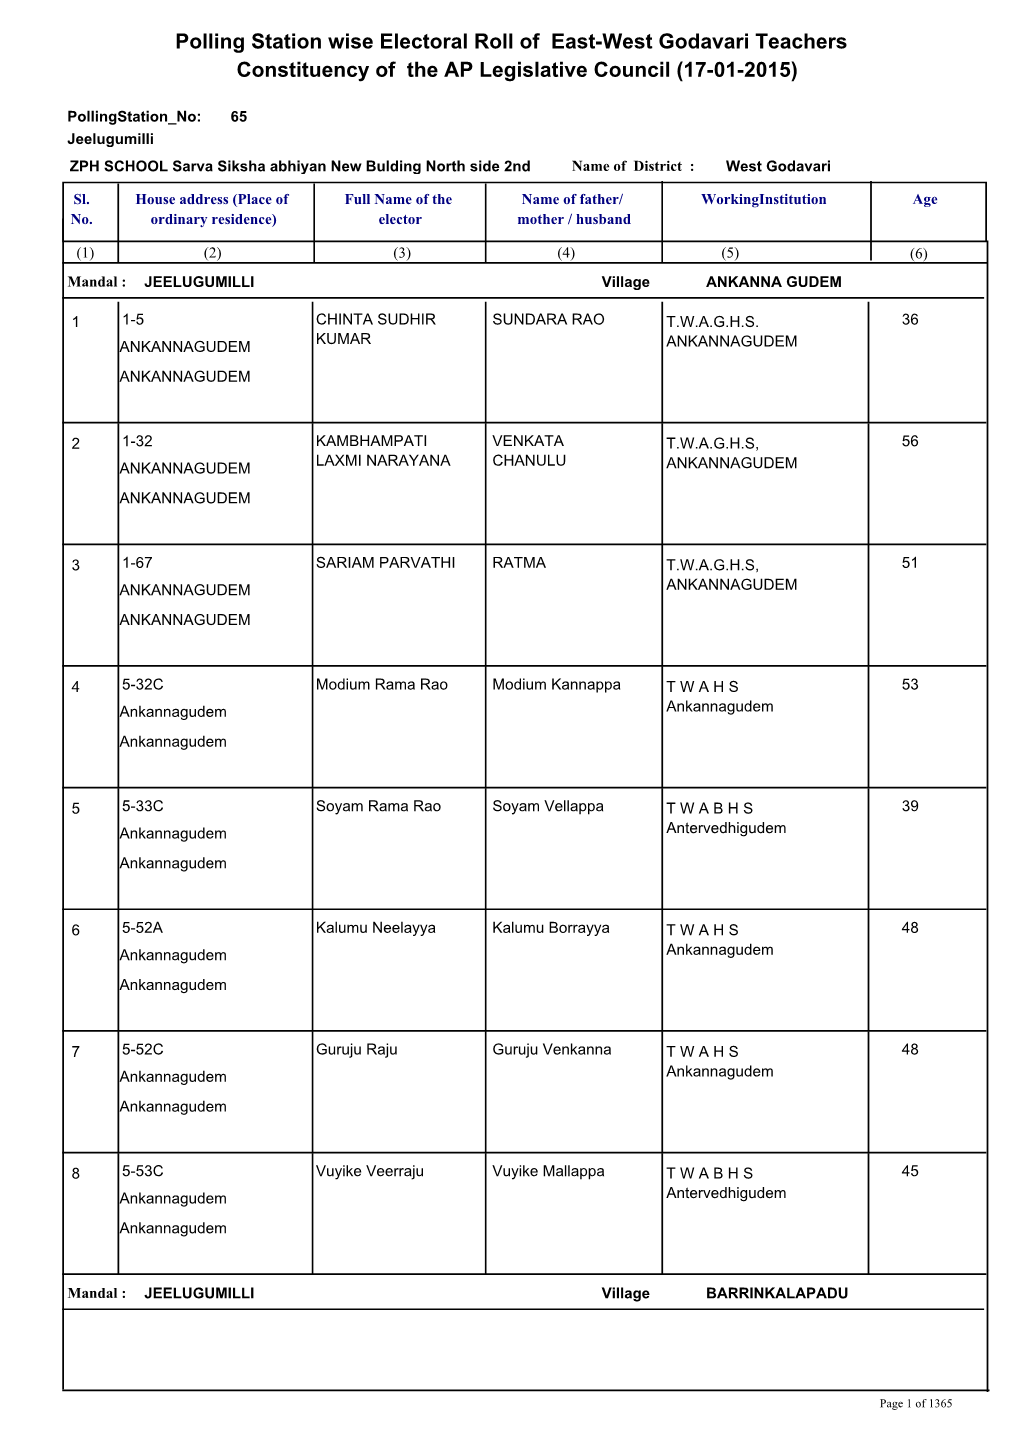 Polling Station Wise Electoral Roll of East-West Godavari Teachers Constituency of the AP Legislative Council (17-01-2015)